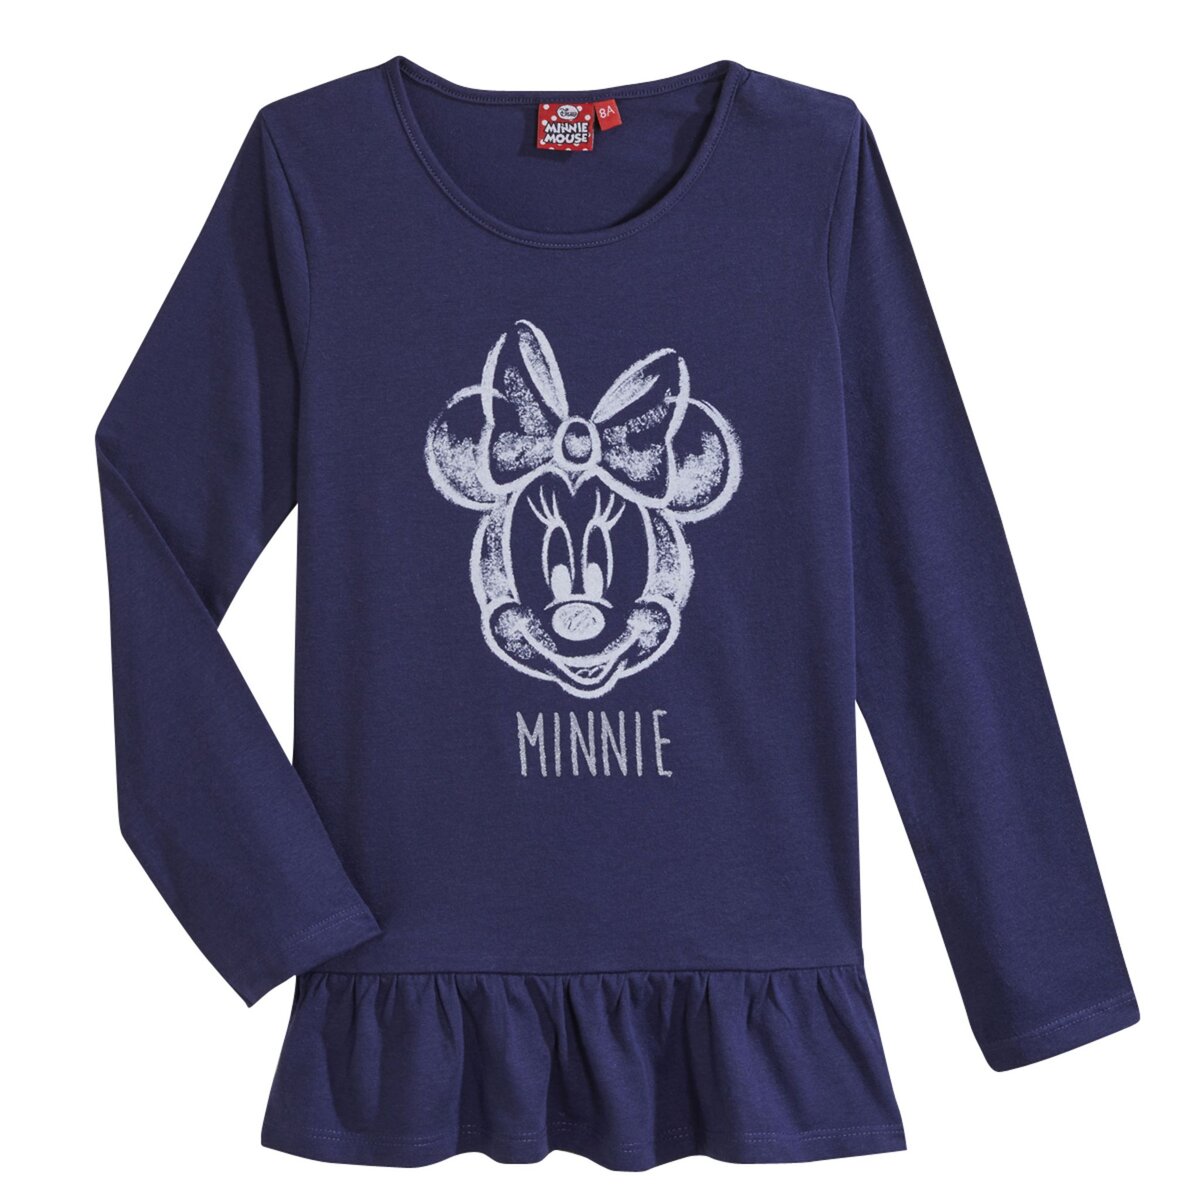 MINNIE Tee shirt manches longues fille 